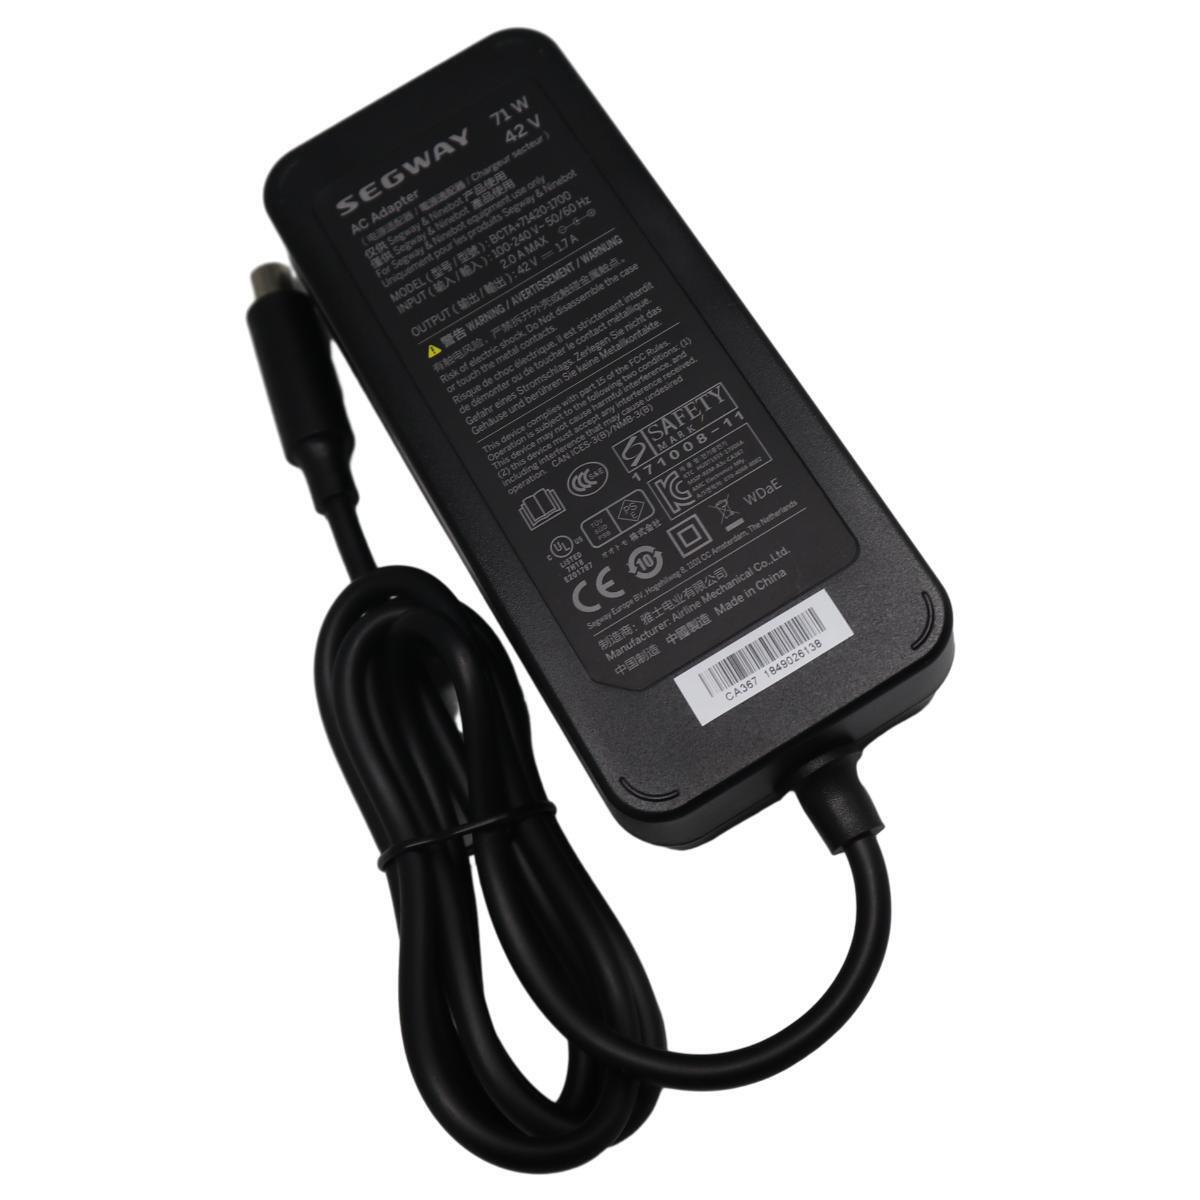 *Brand NEW*Genuine Segway 42V 1.7A AC Adapter BCTA+71420-1700 Ninebot Electric Scooter Power Supply